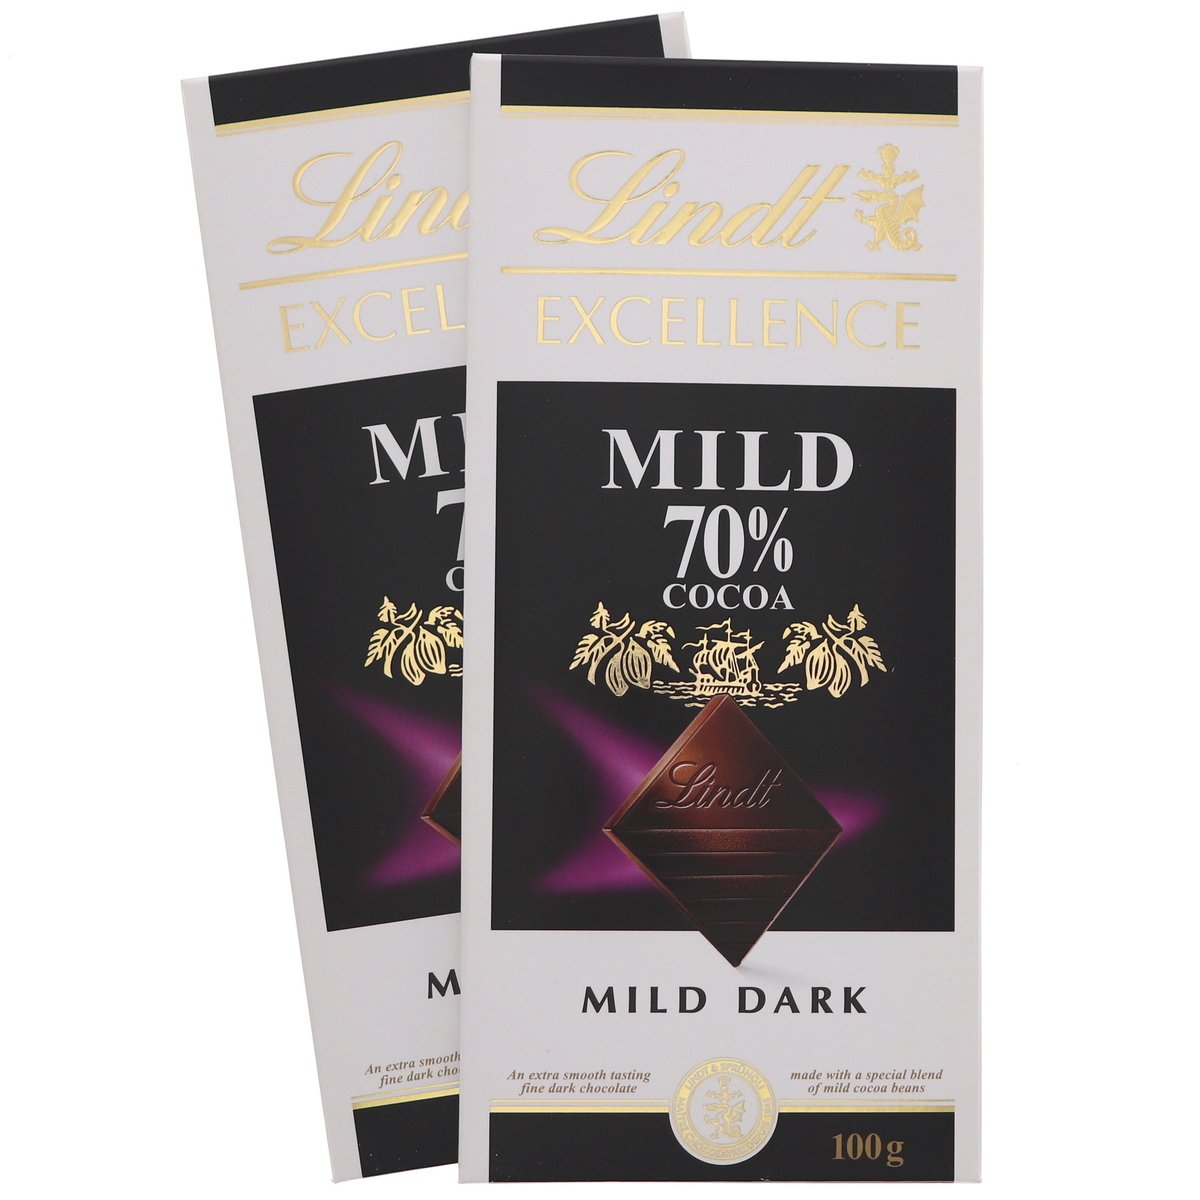 Lindt Excellence 70% Cocoa Mild Dark Chocolate 2 x 100 g